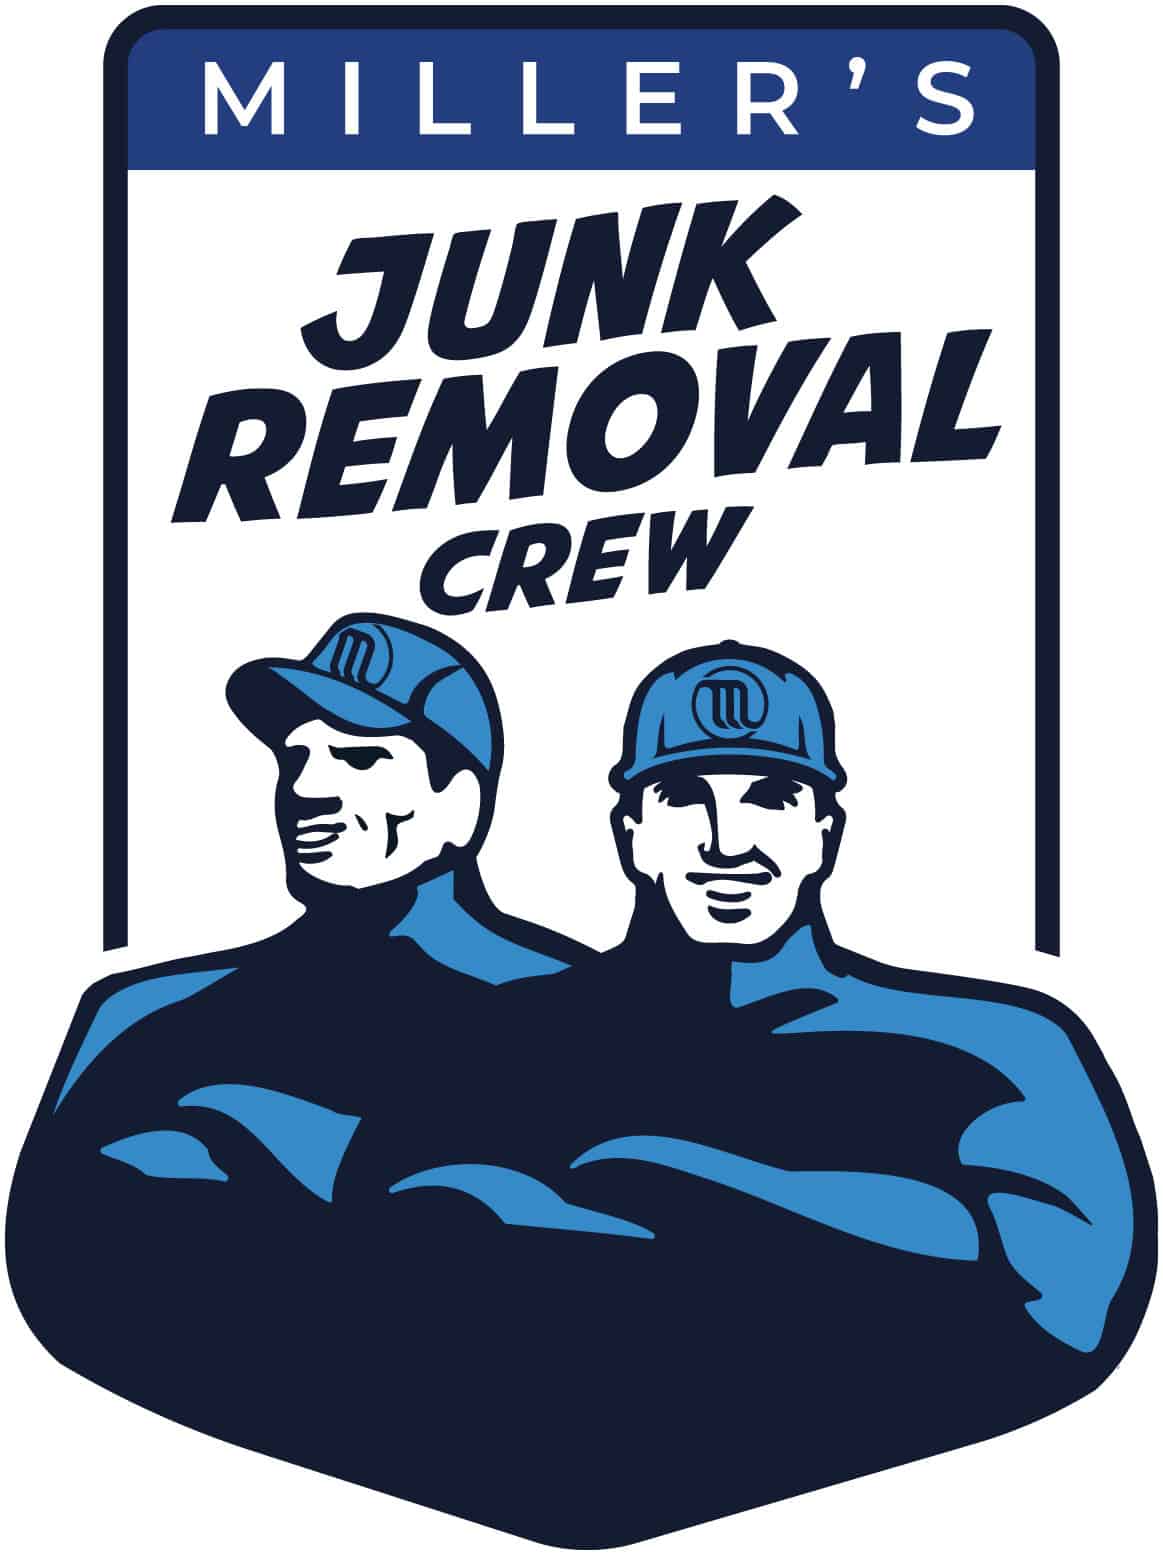 Millers Junk Removal Crew Logo